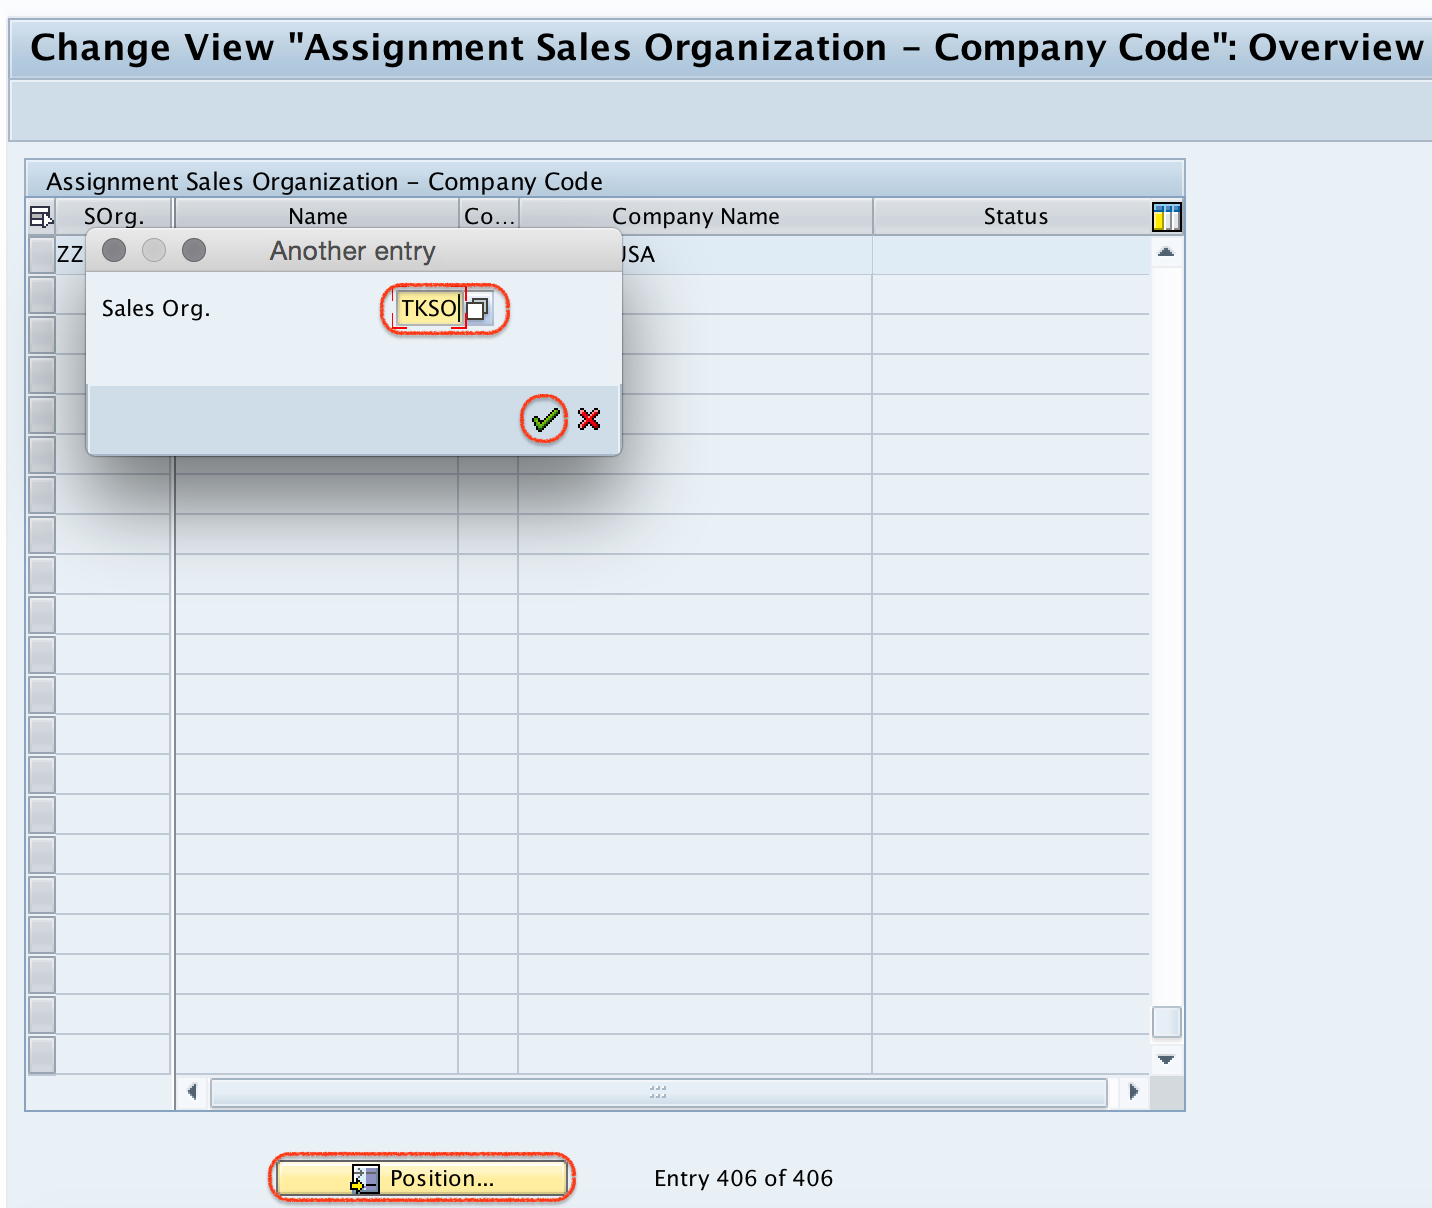 Assignment sales organization - company code